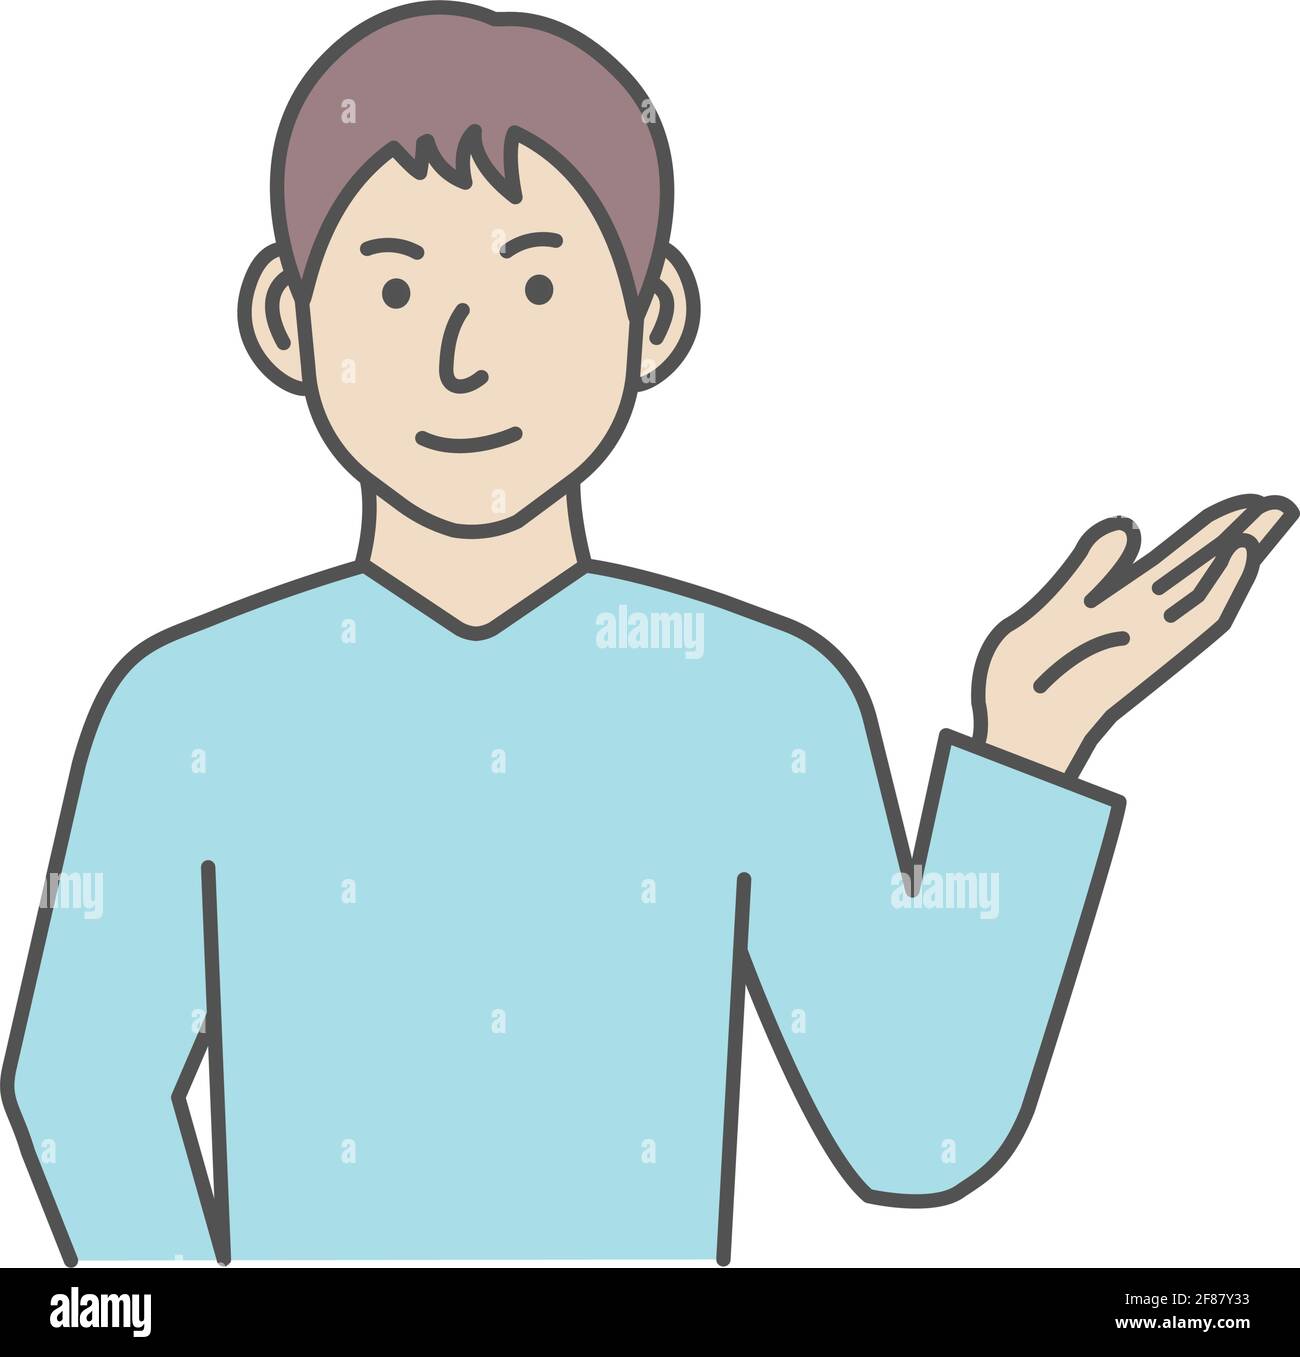 Vector illustration of a young man introducing or navigating Stock Vector